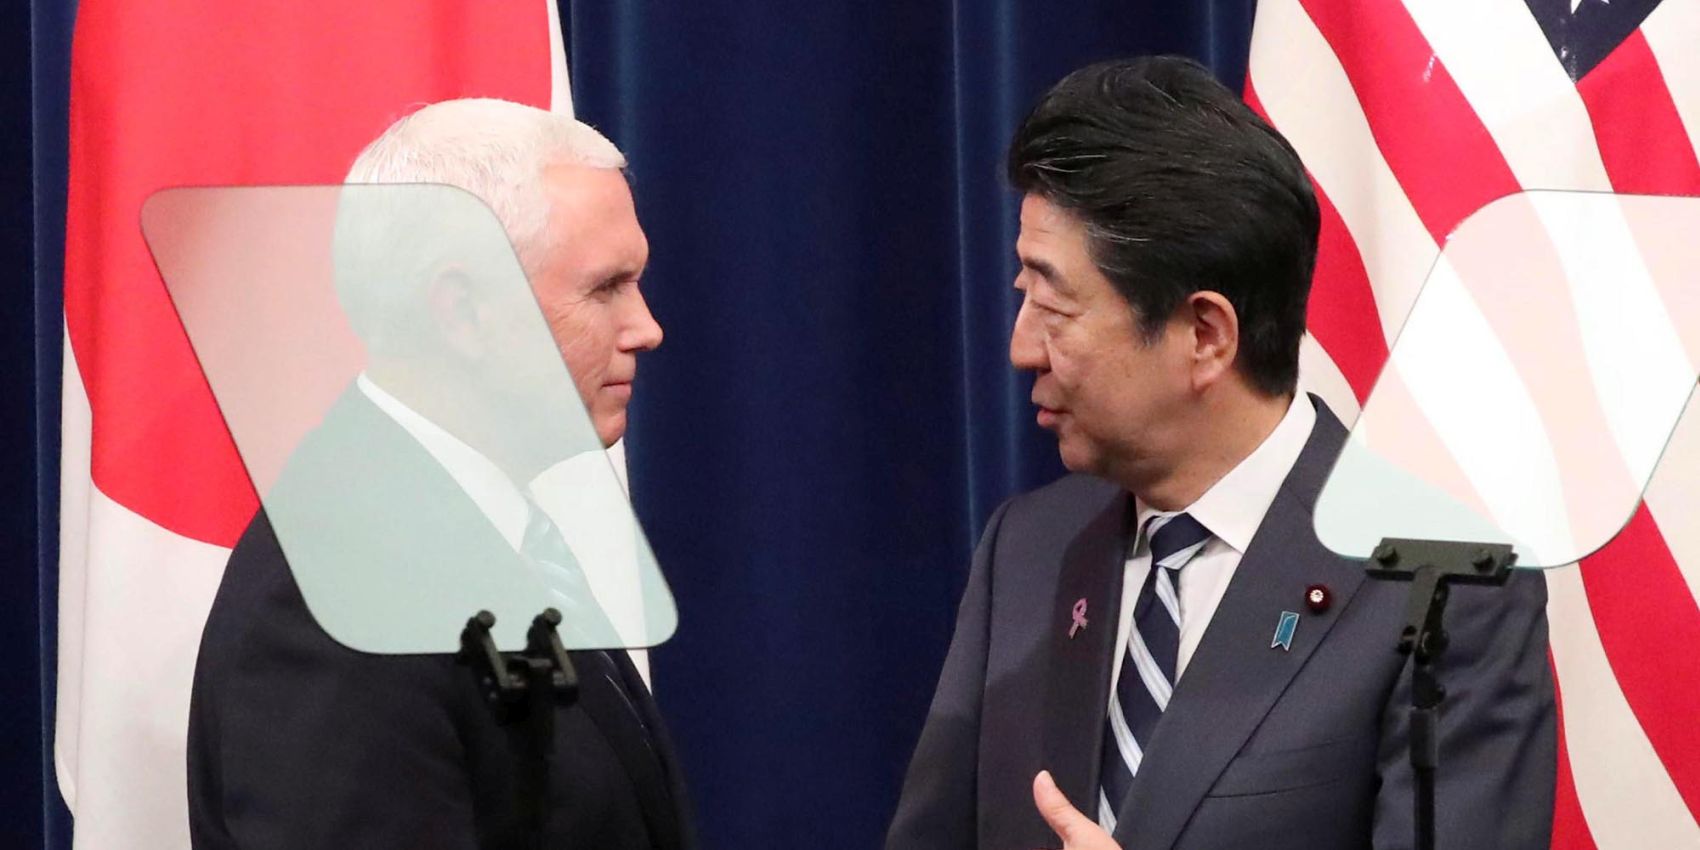 Can Shinzo Abe Bring U.S. Vice President Pence Over on TPP?